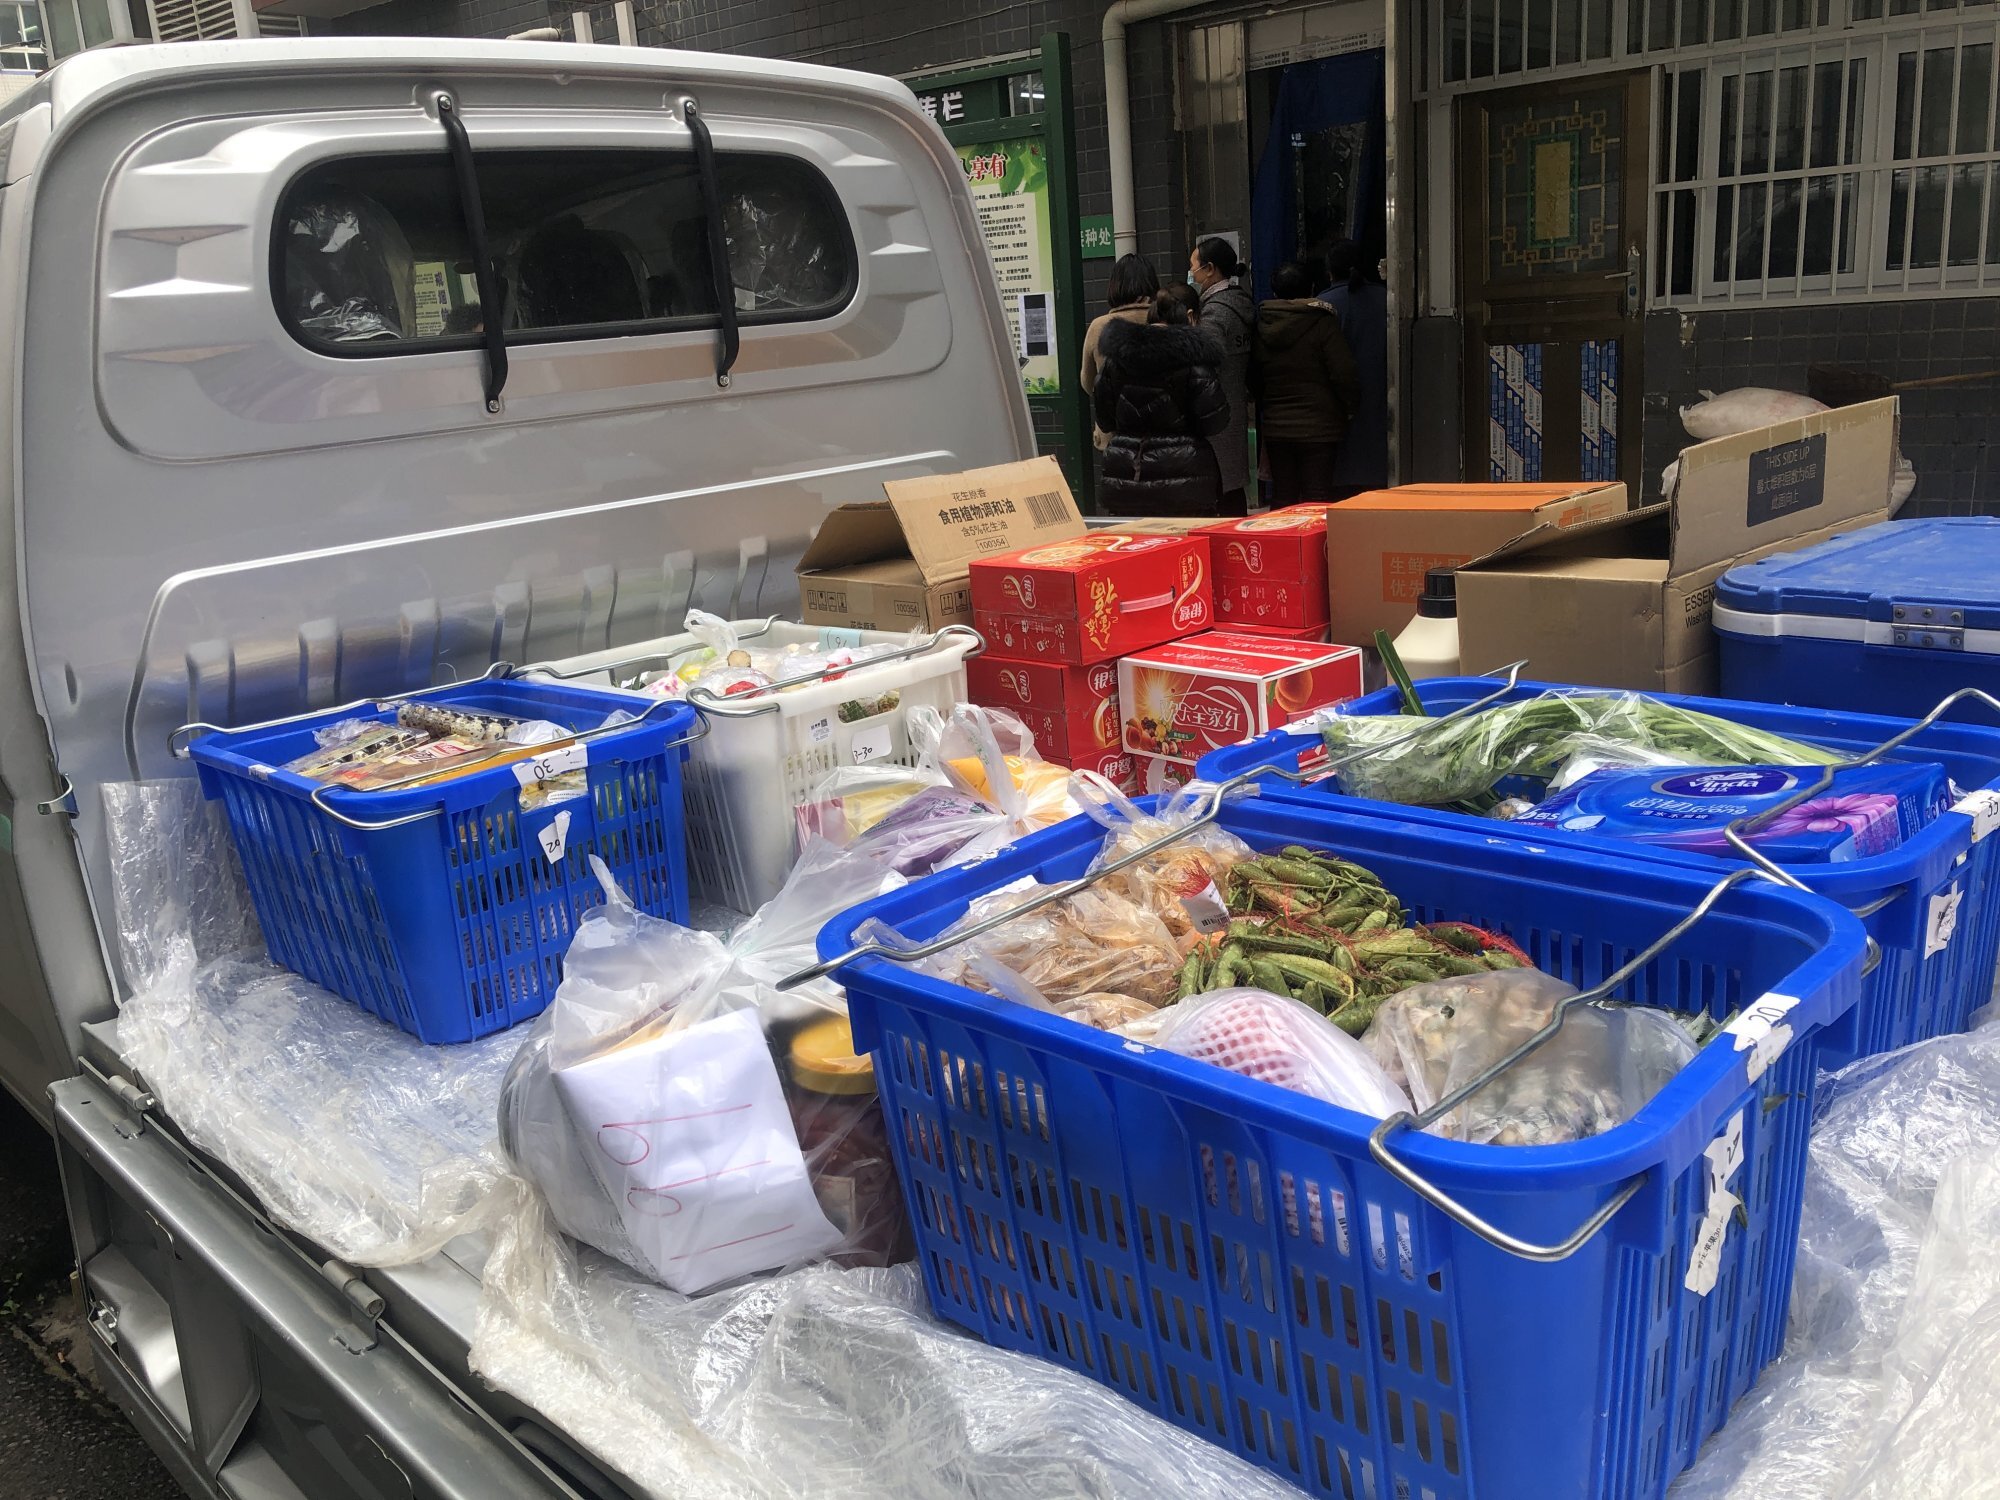 A delivery truck carries groceries and other products bought by residents at a community in Lichuan county, Hubei province, China. Photo: Jane Zhang